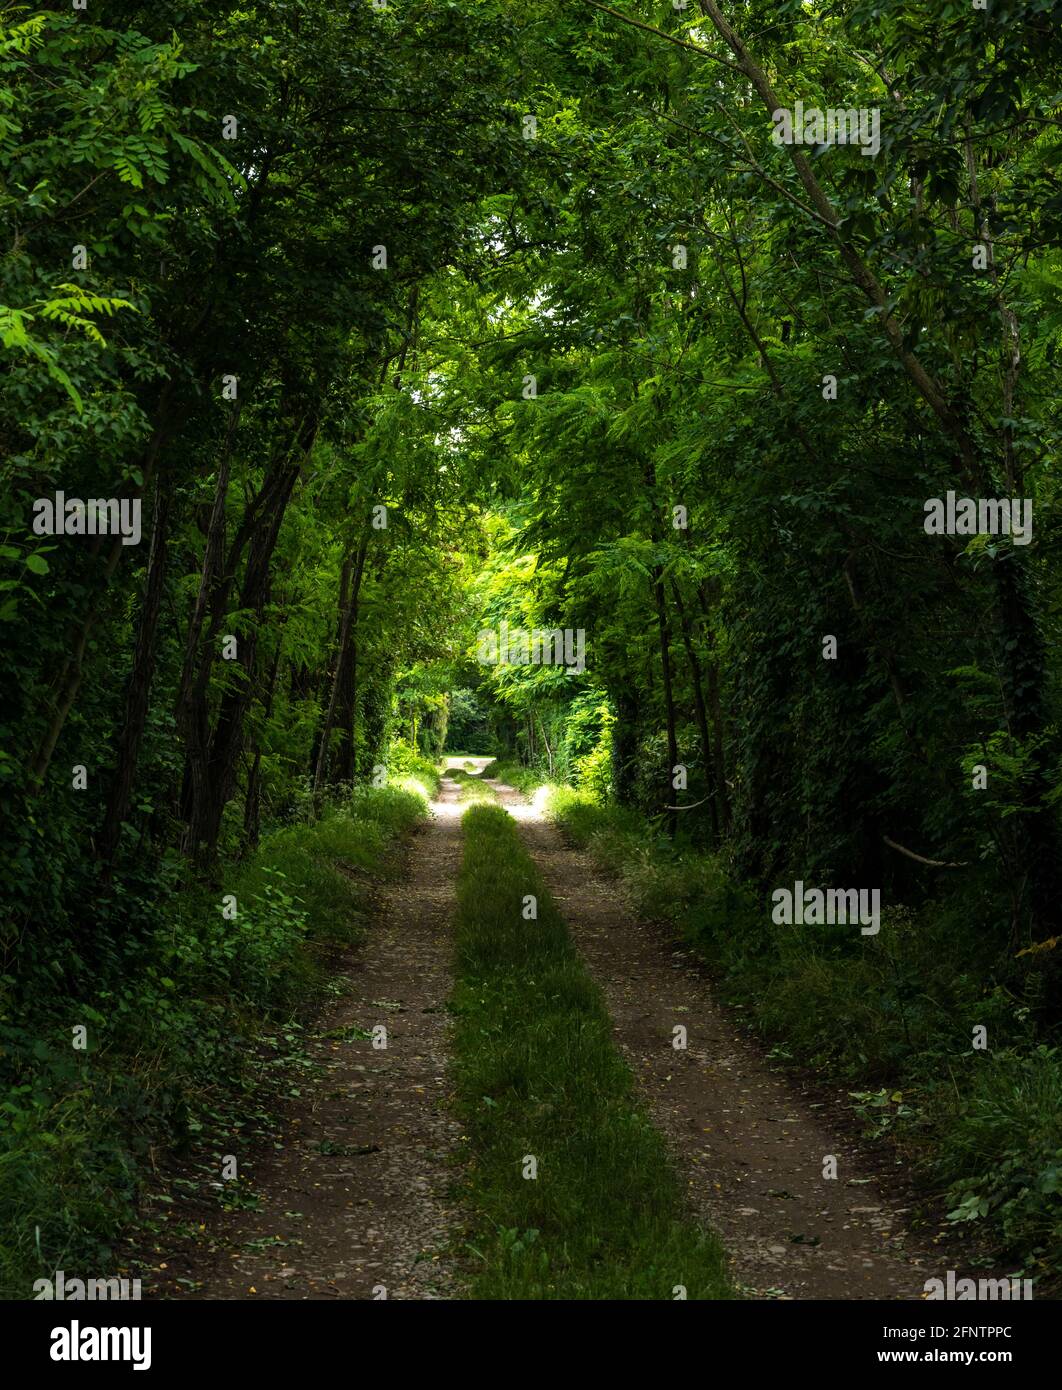 Dirt road through green Forest, trees and leaves in the north Italy Stock Photo